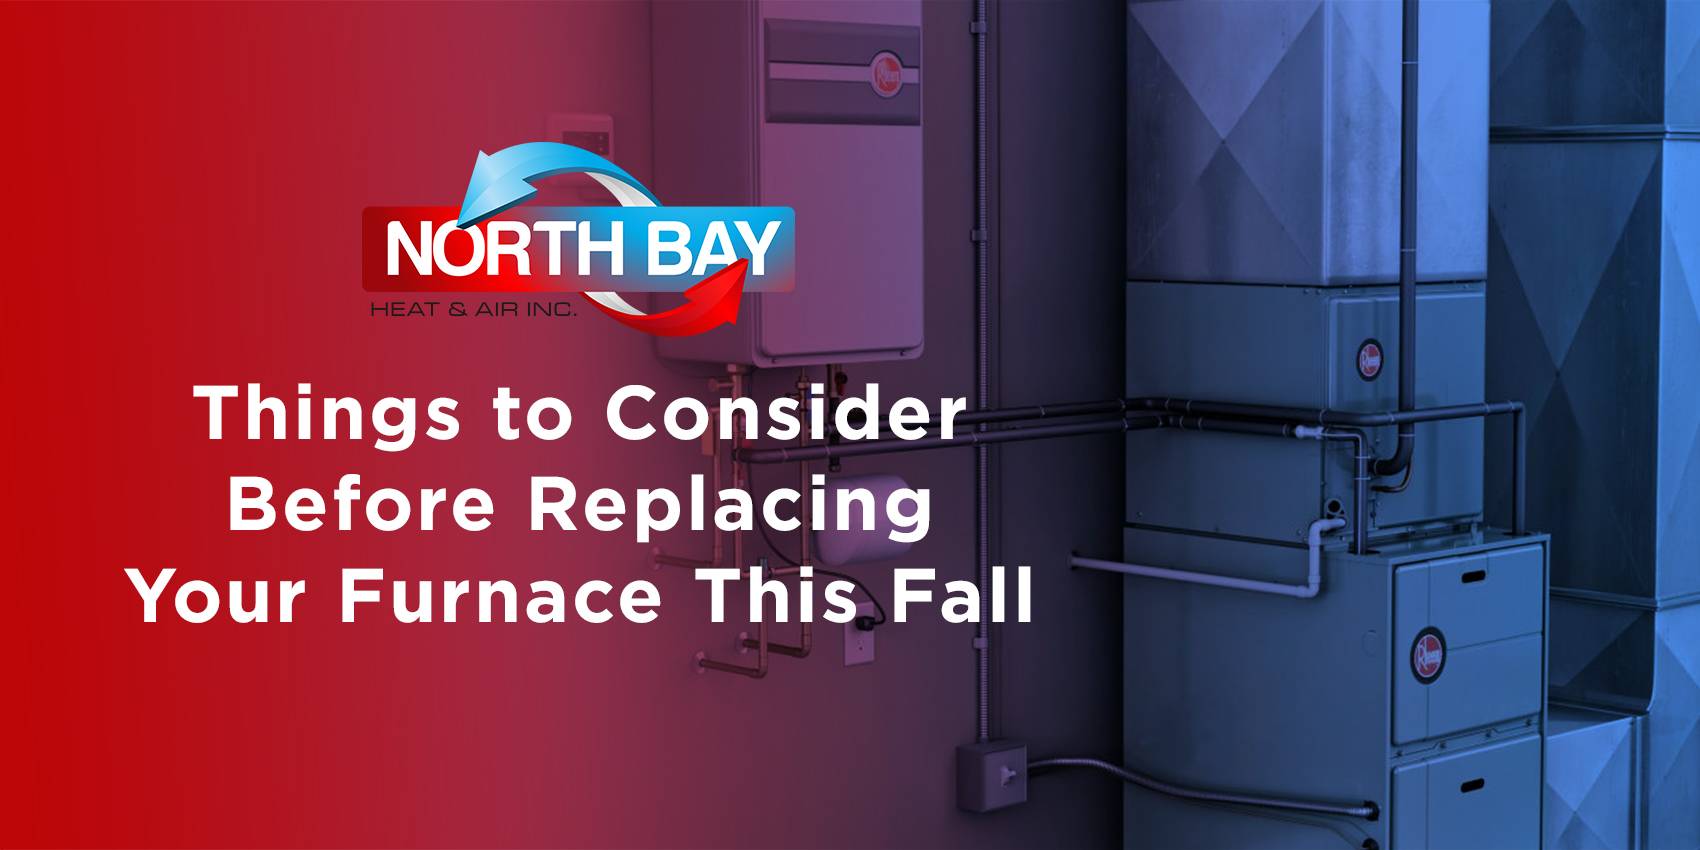 Things to Consider Before Replacing Your Furnace This Fall